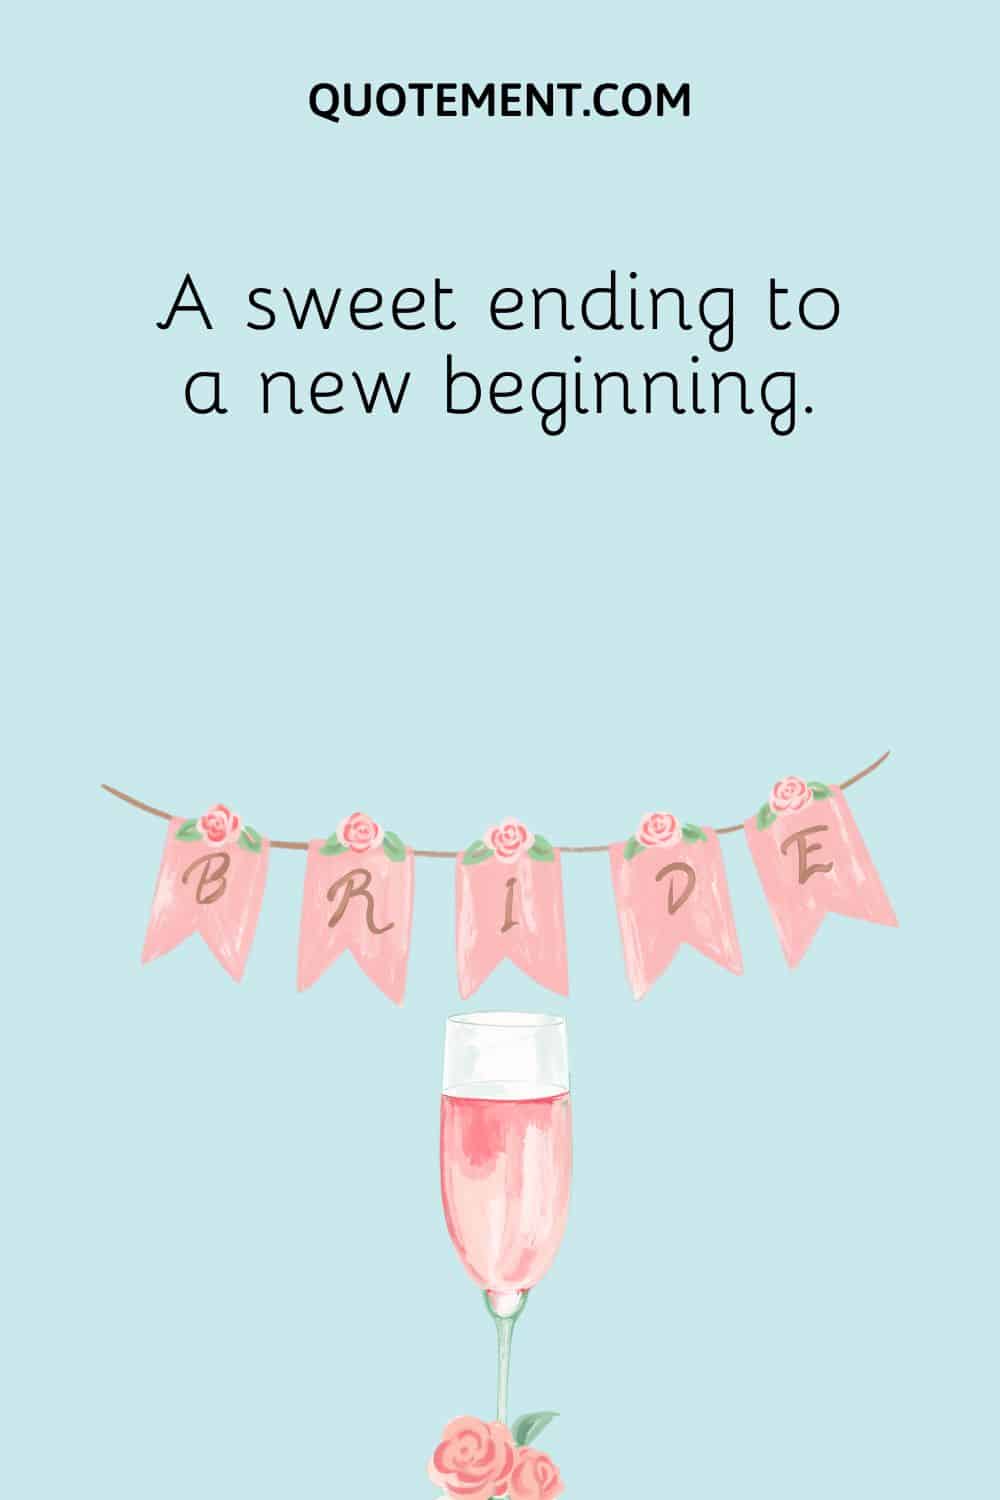 A sweet ending to a new beginning.